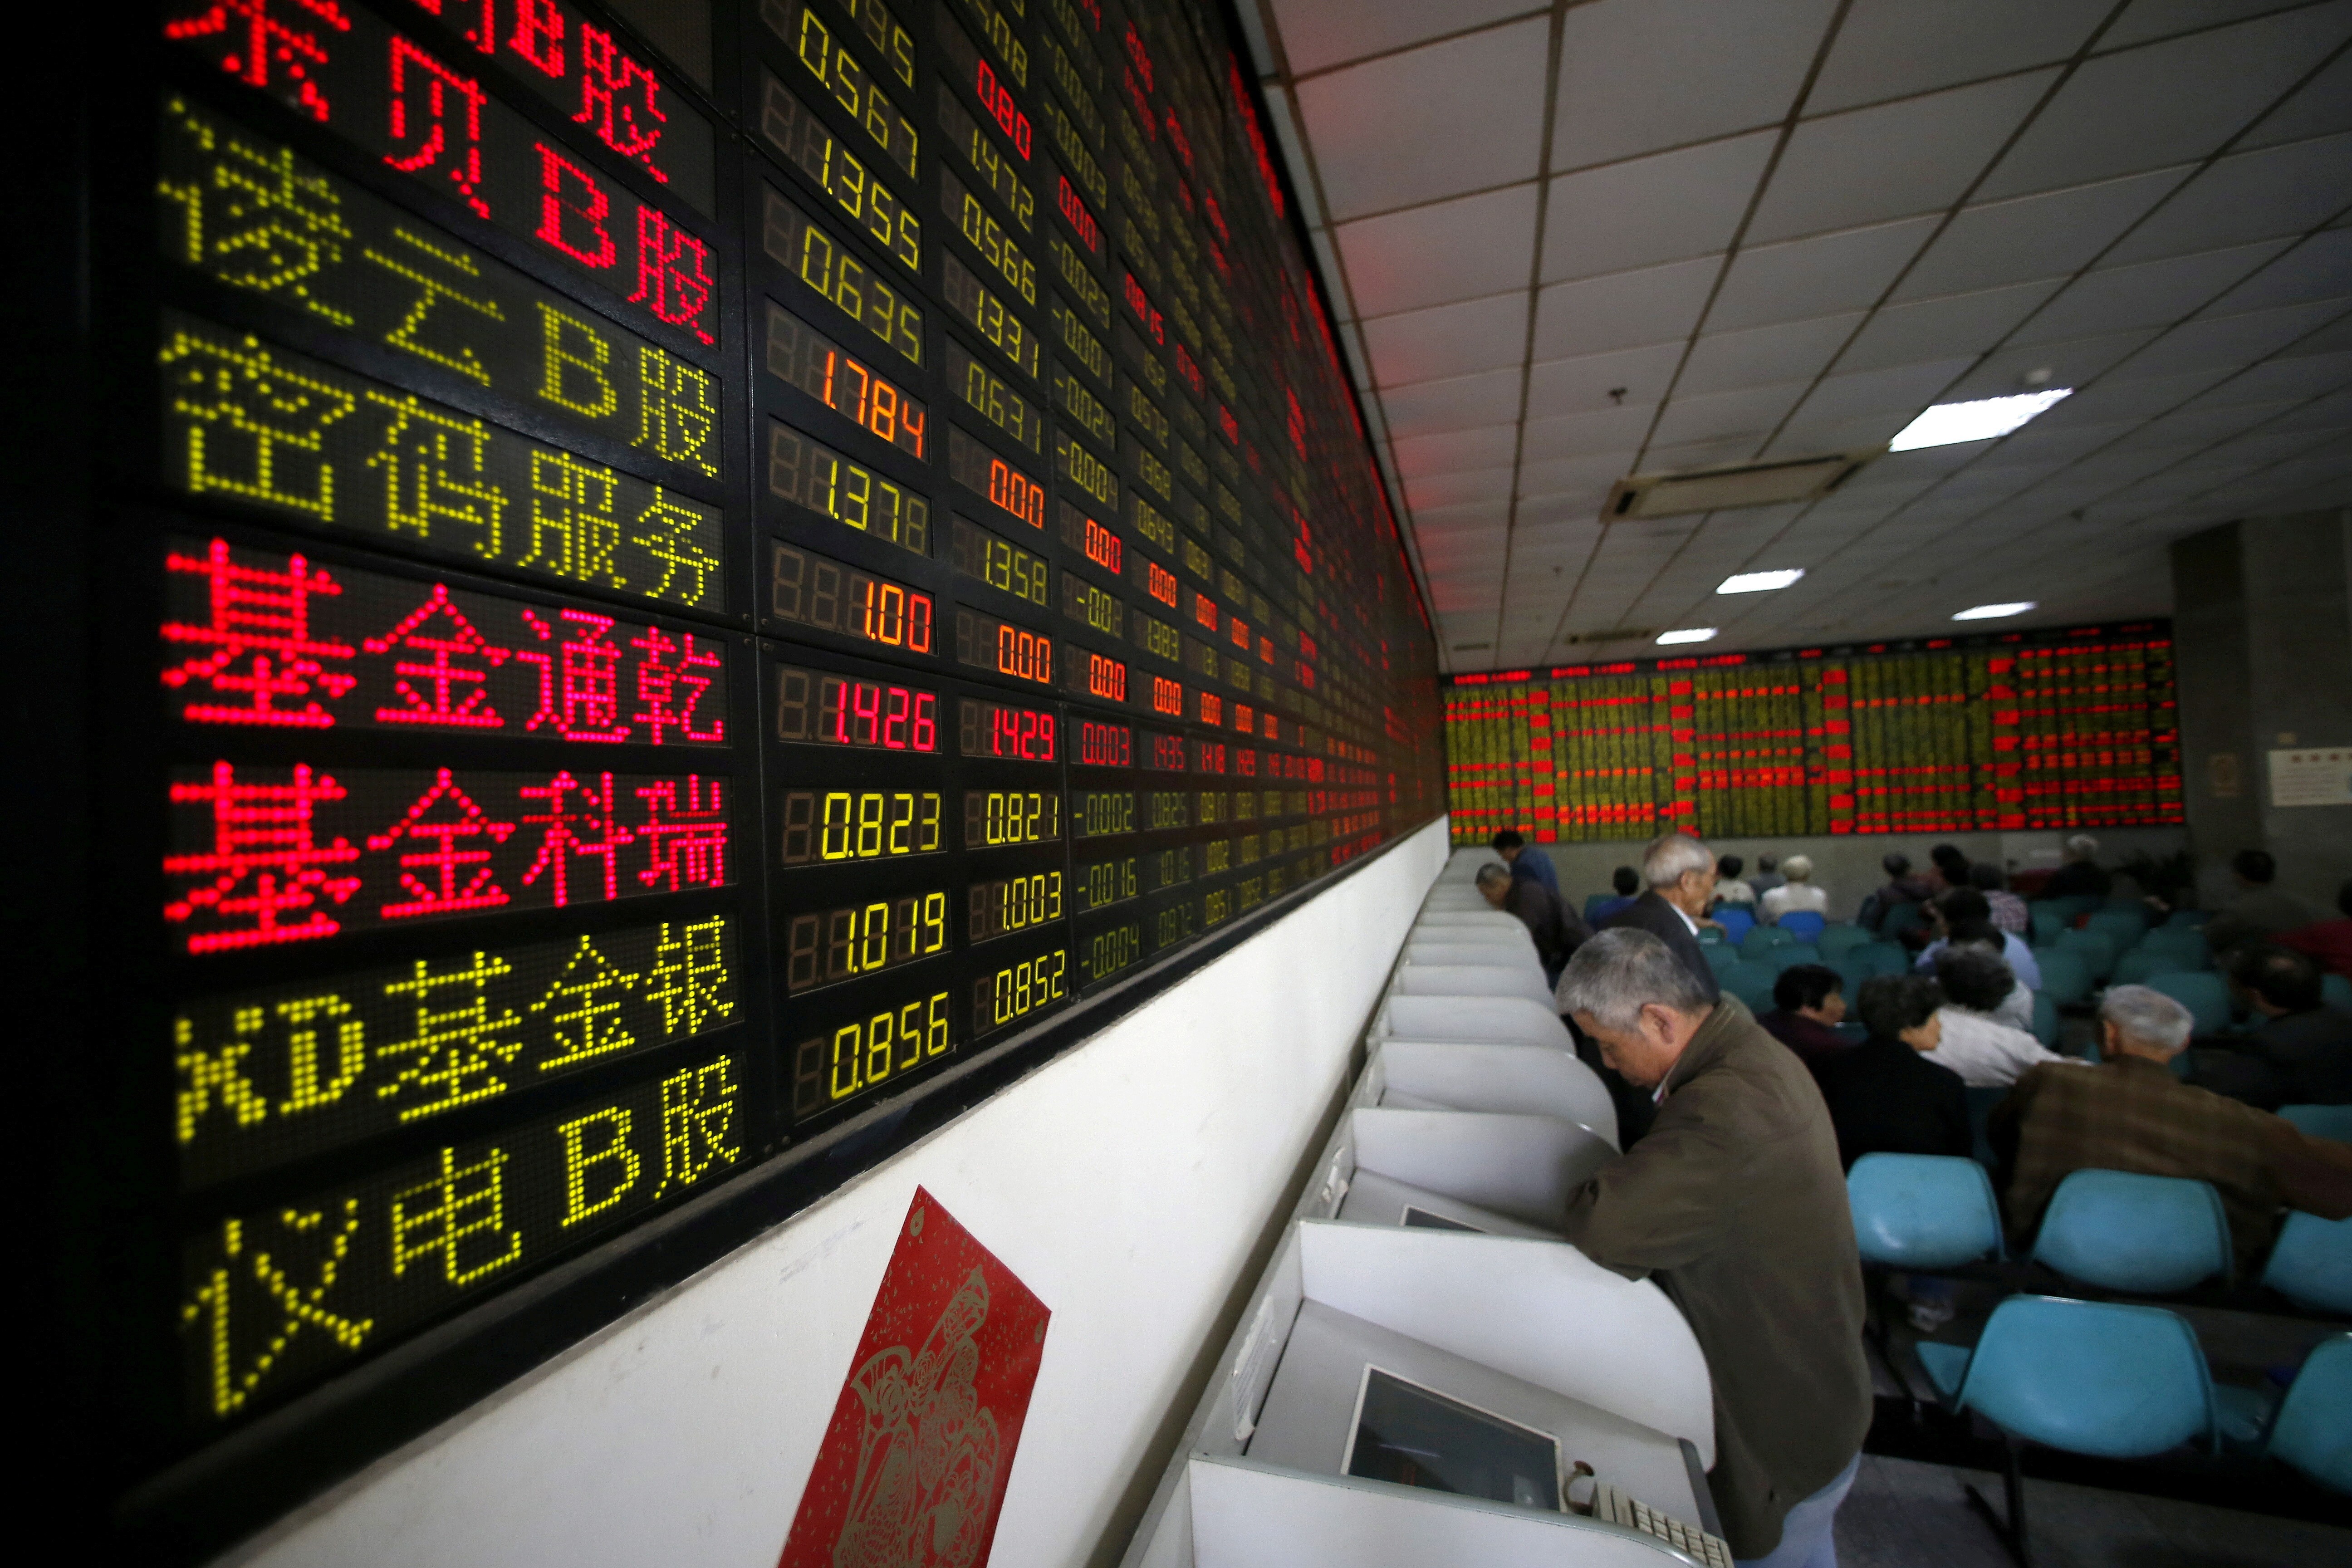 Investors look at computer screens showing stock prices at a brokerage house in Shanghai. Photo: Reuters